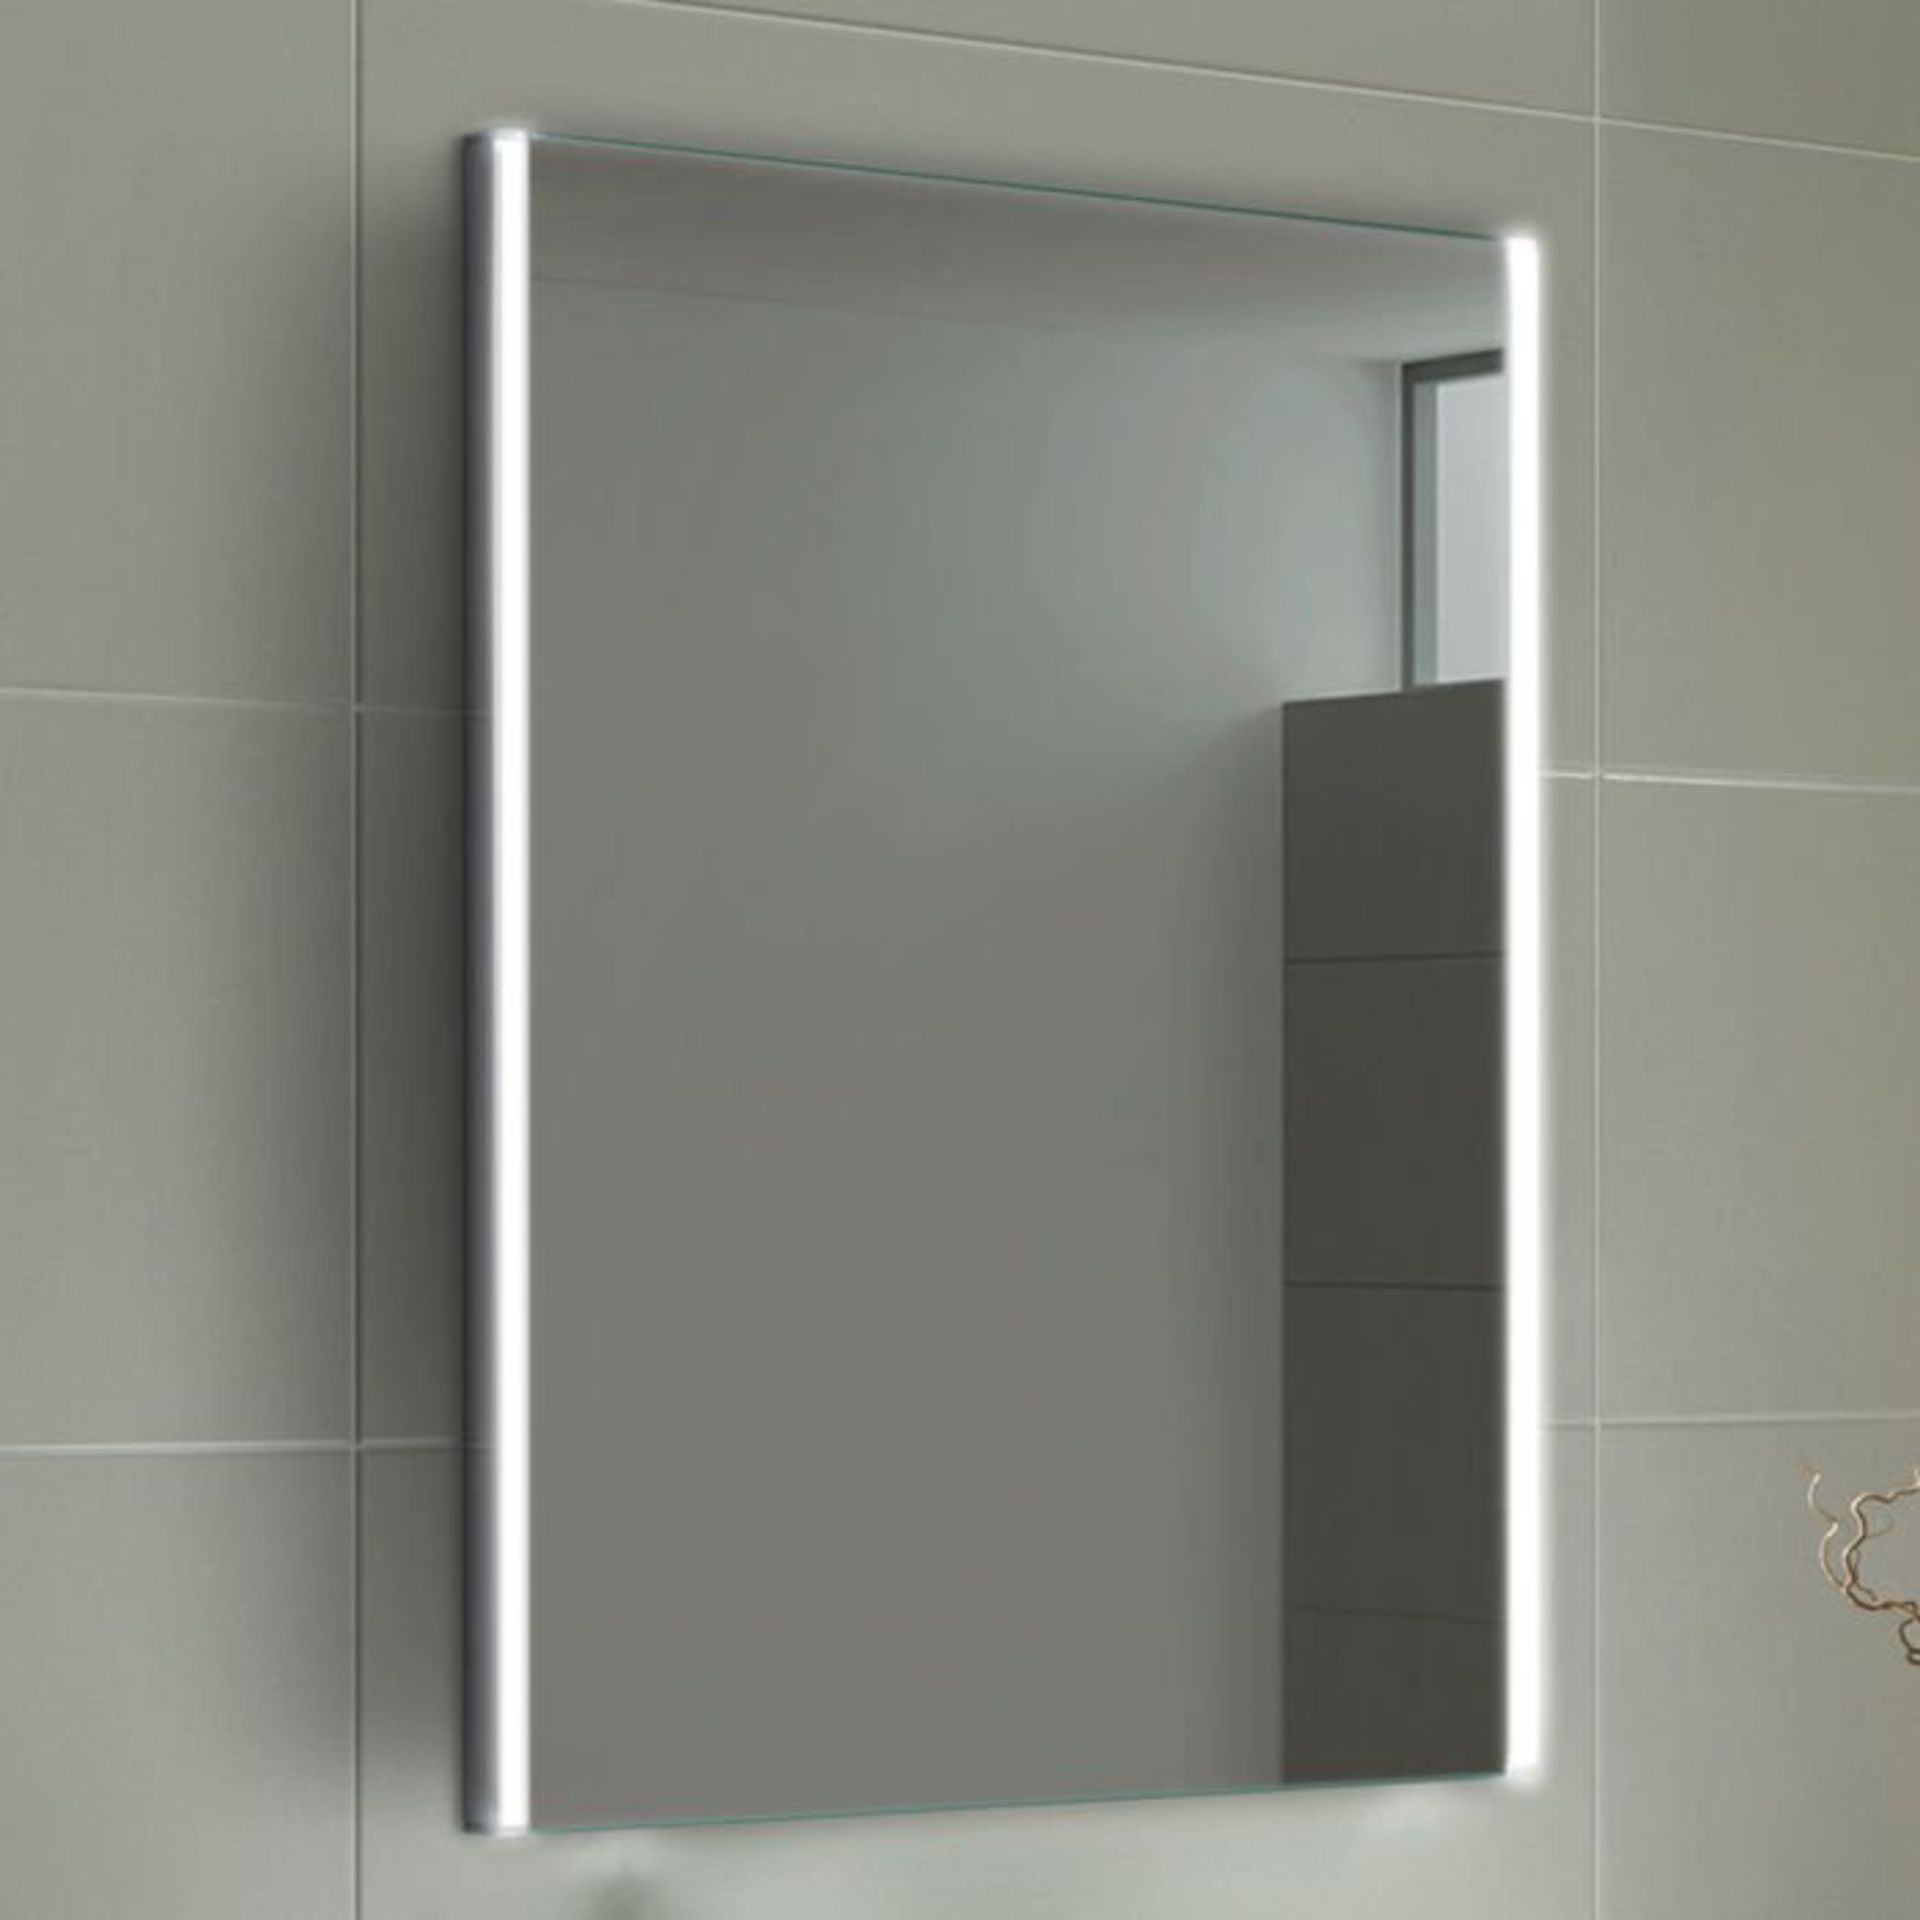 (H211) 700x500mm Lunar Illuminated LED Mirror. RRP £349.99. Energy efficient LED lighting with